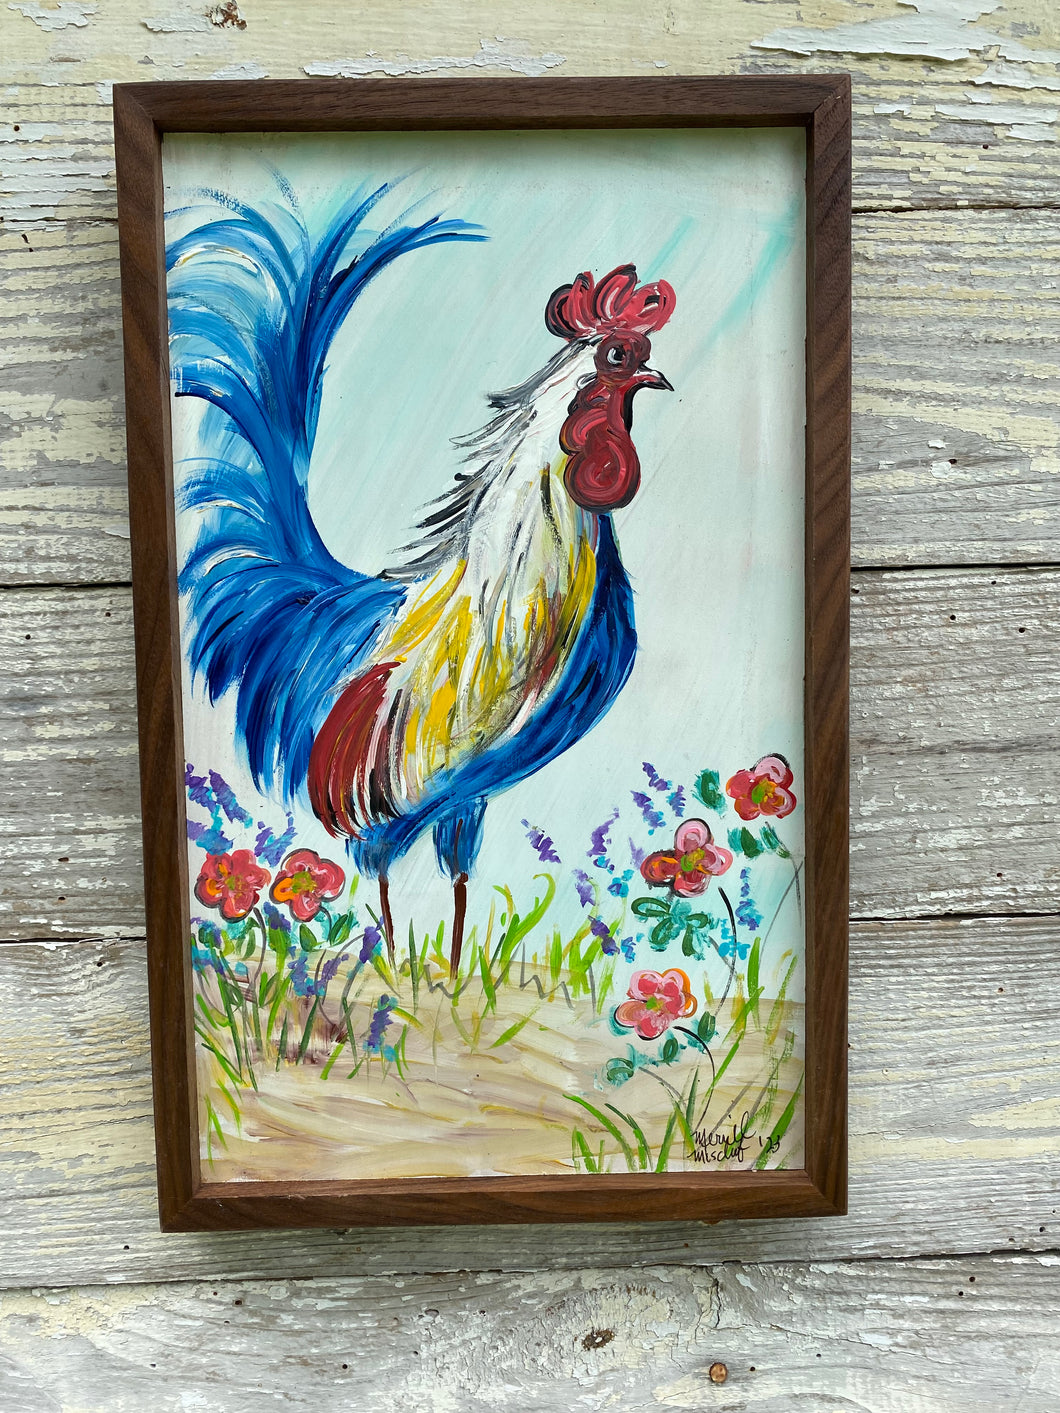 Rooster #22 Original Painting on Reclaimed Wood